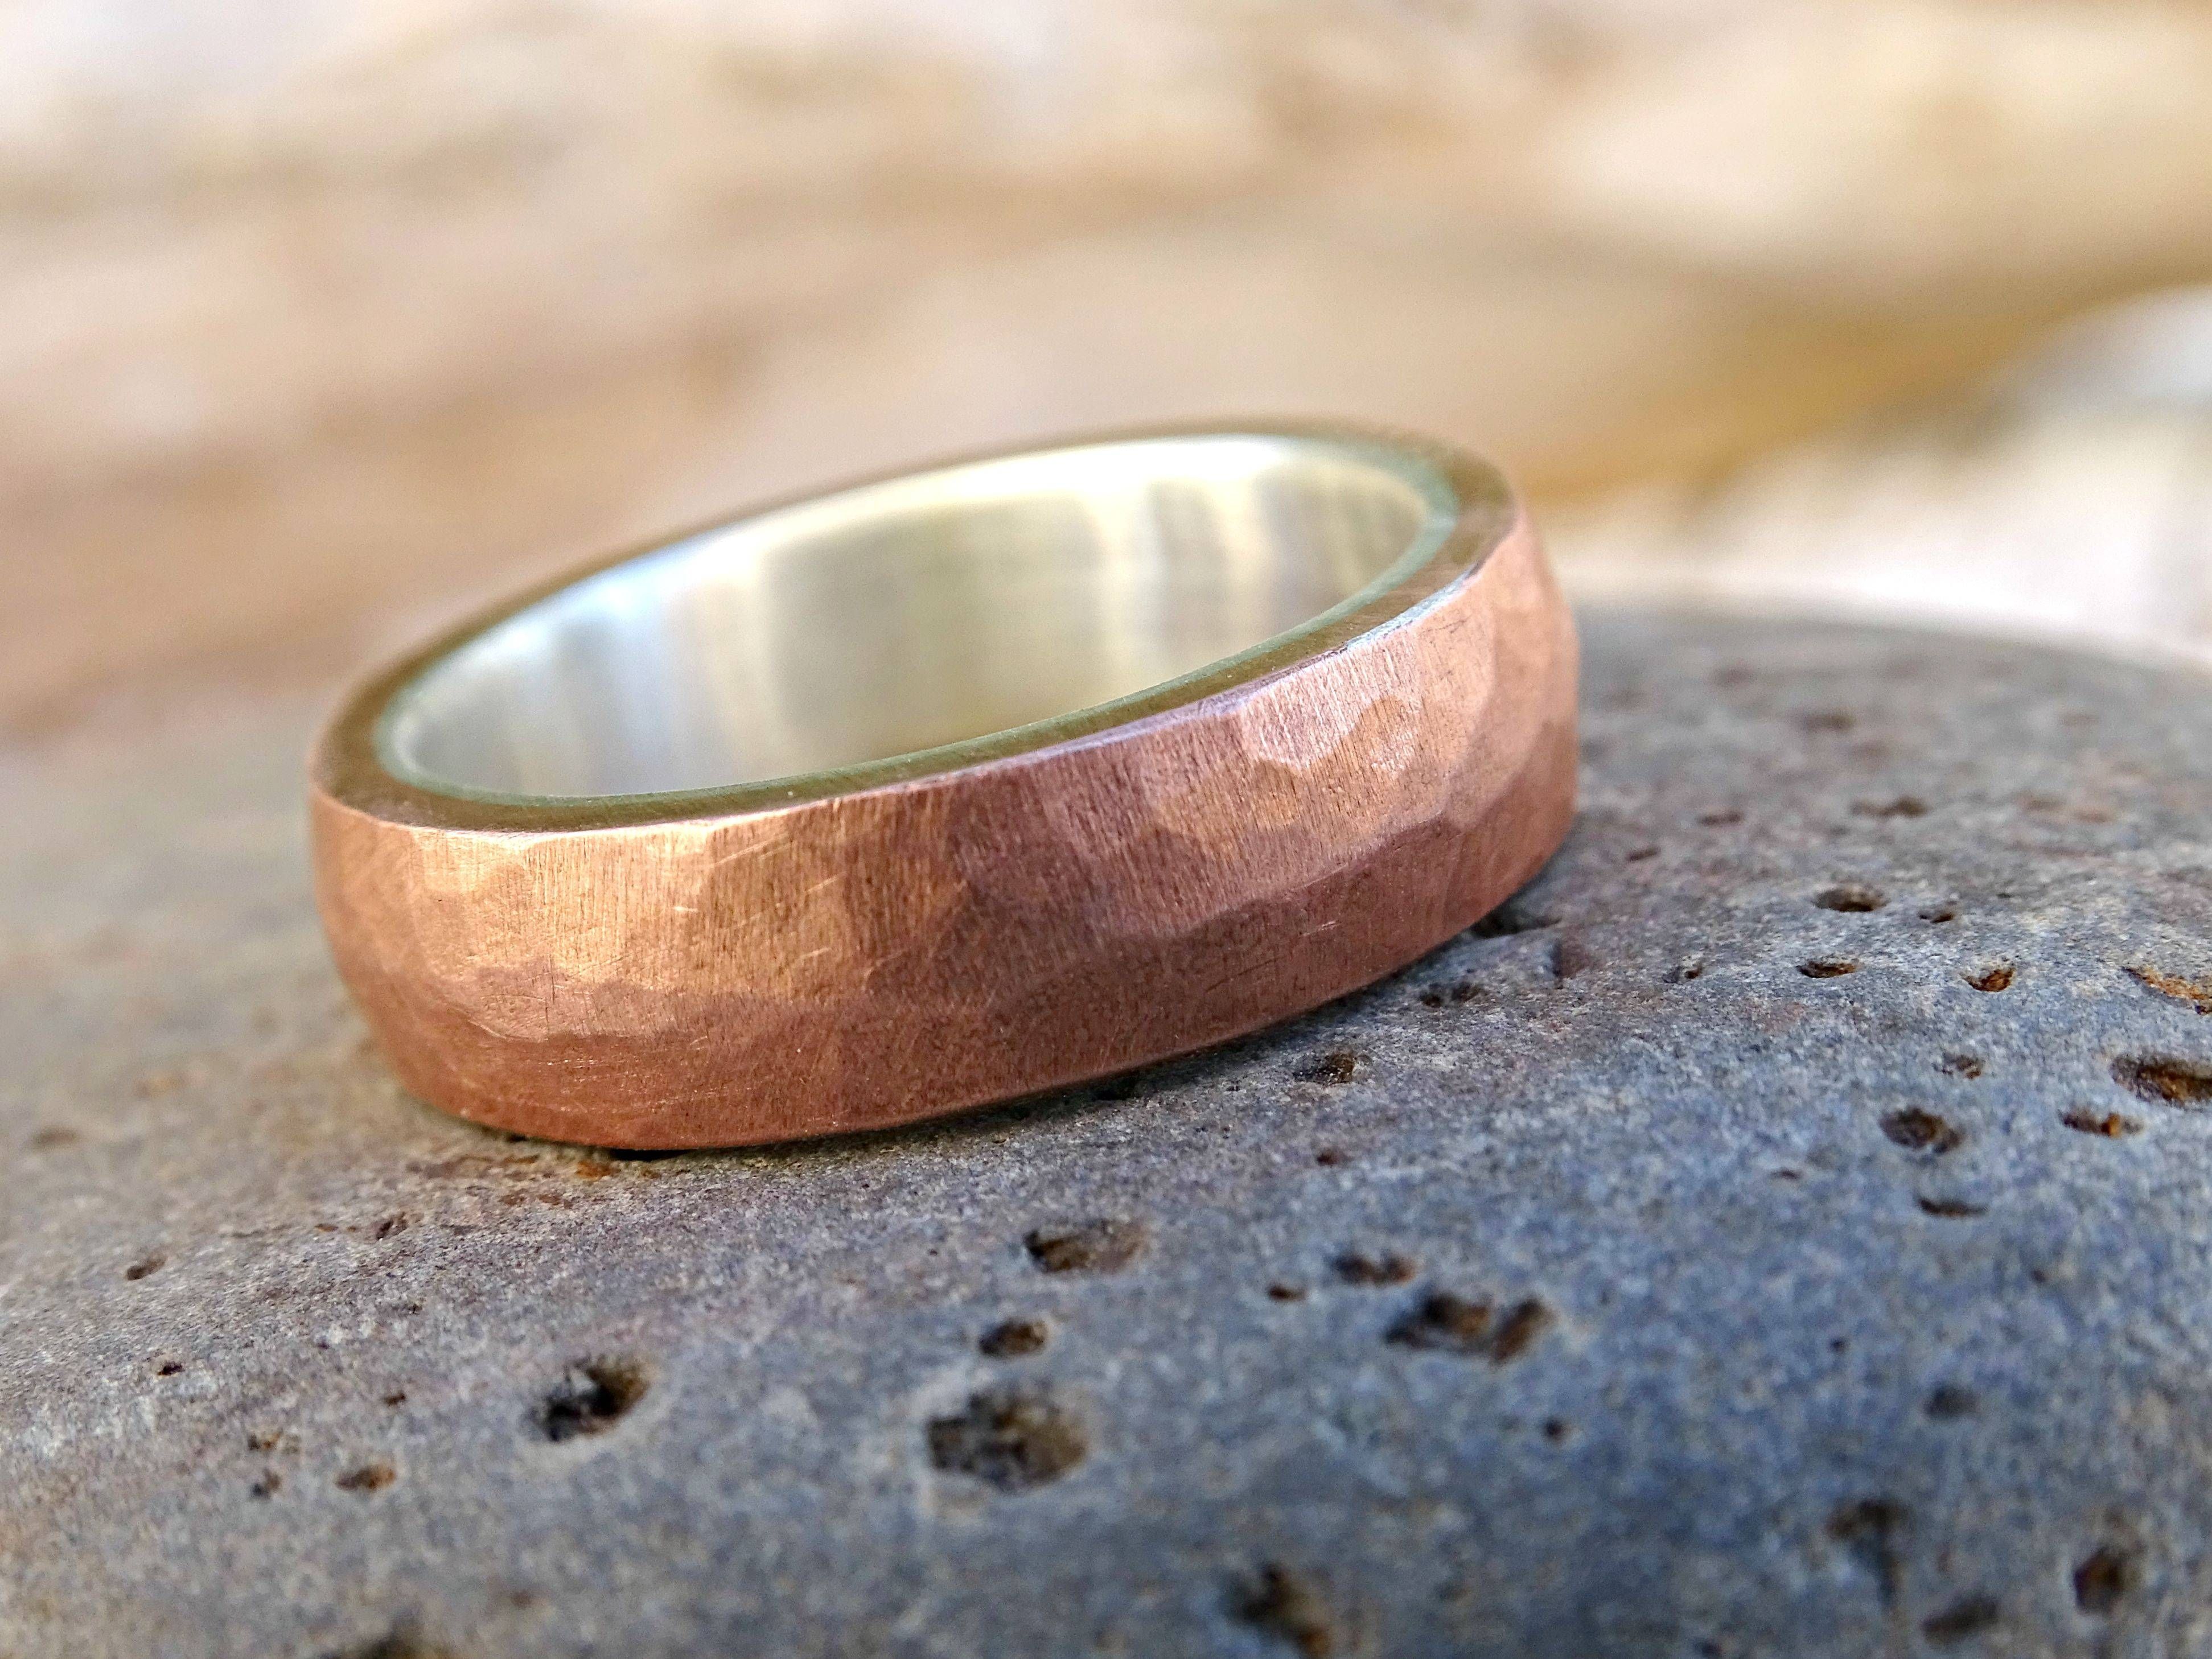 Buy A Hand Crafted Mens Wedding Band Copper Silver, Forged Mixed Inside Copper Men's Wedding Bands (View 3 of 15)